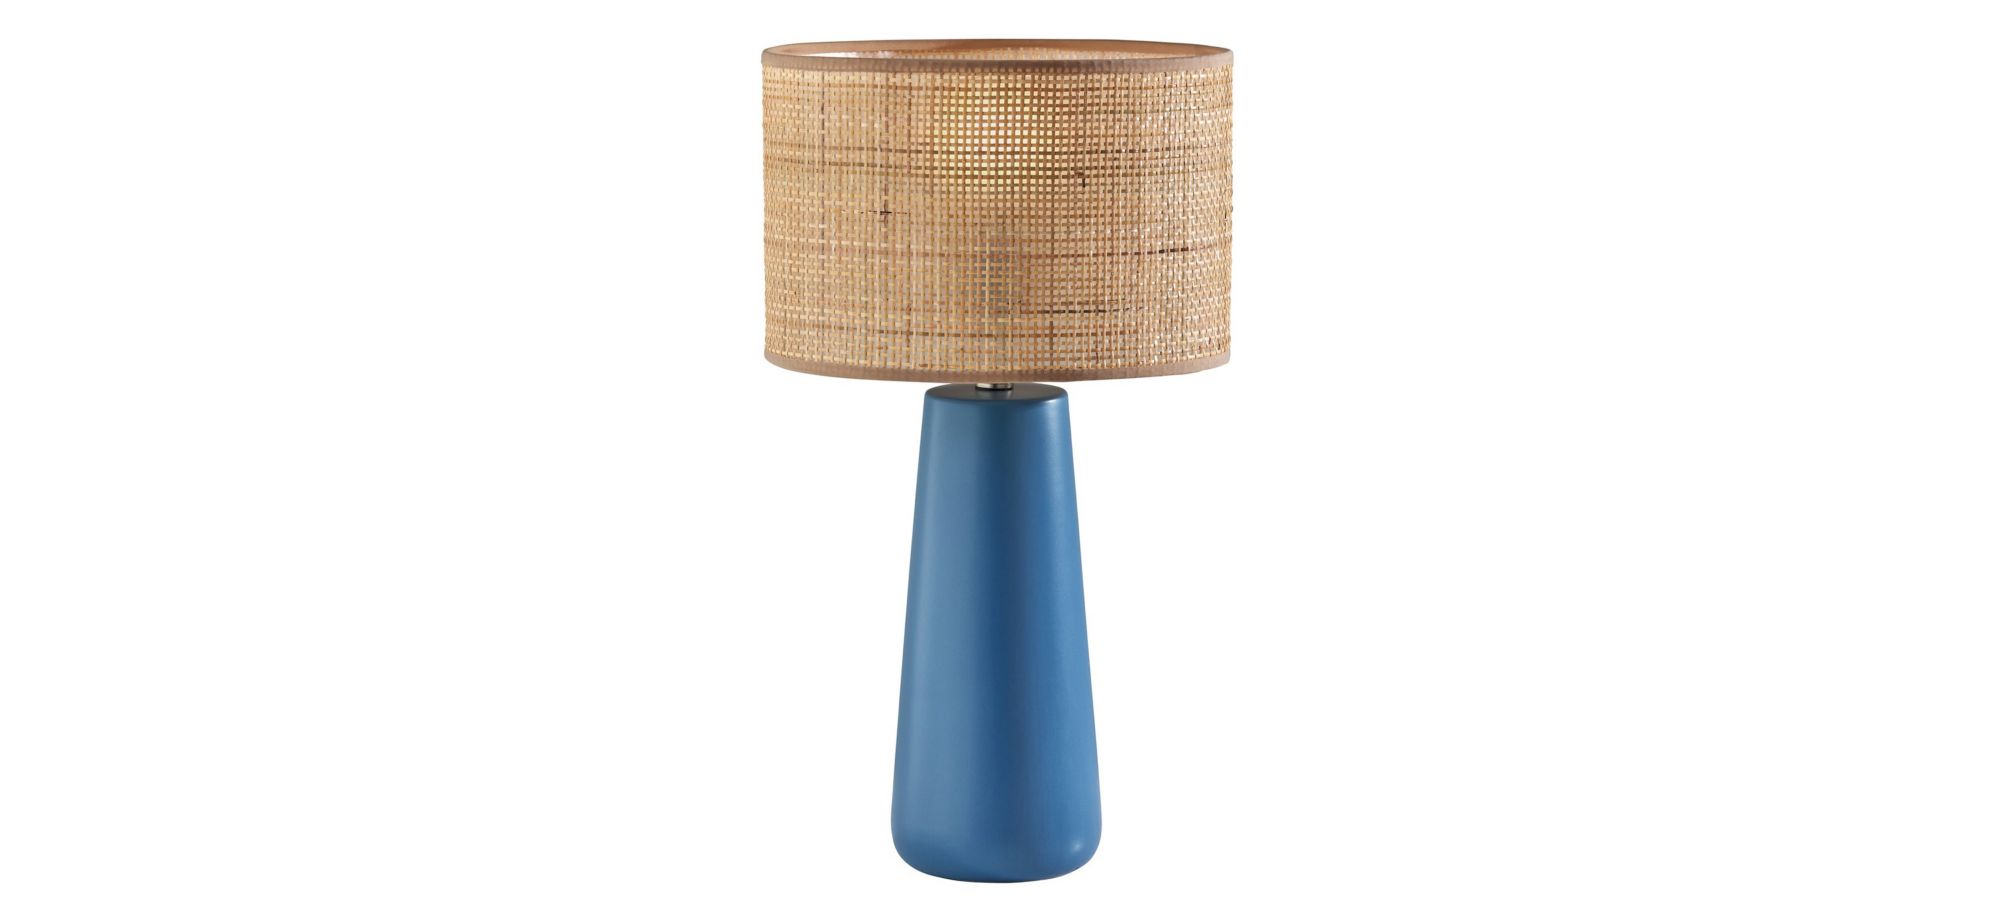 Sheffield Table Lamp in Blue by Adesso Inc